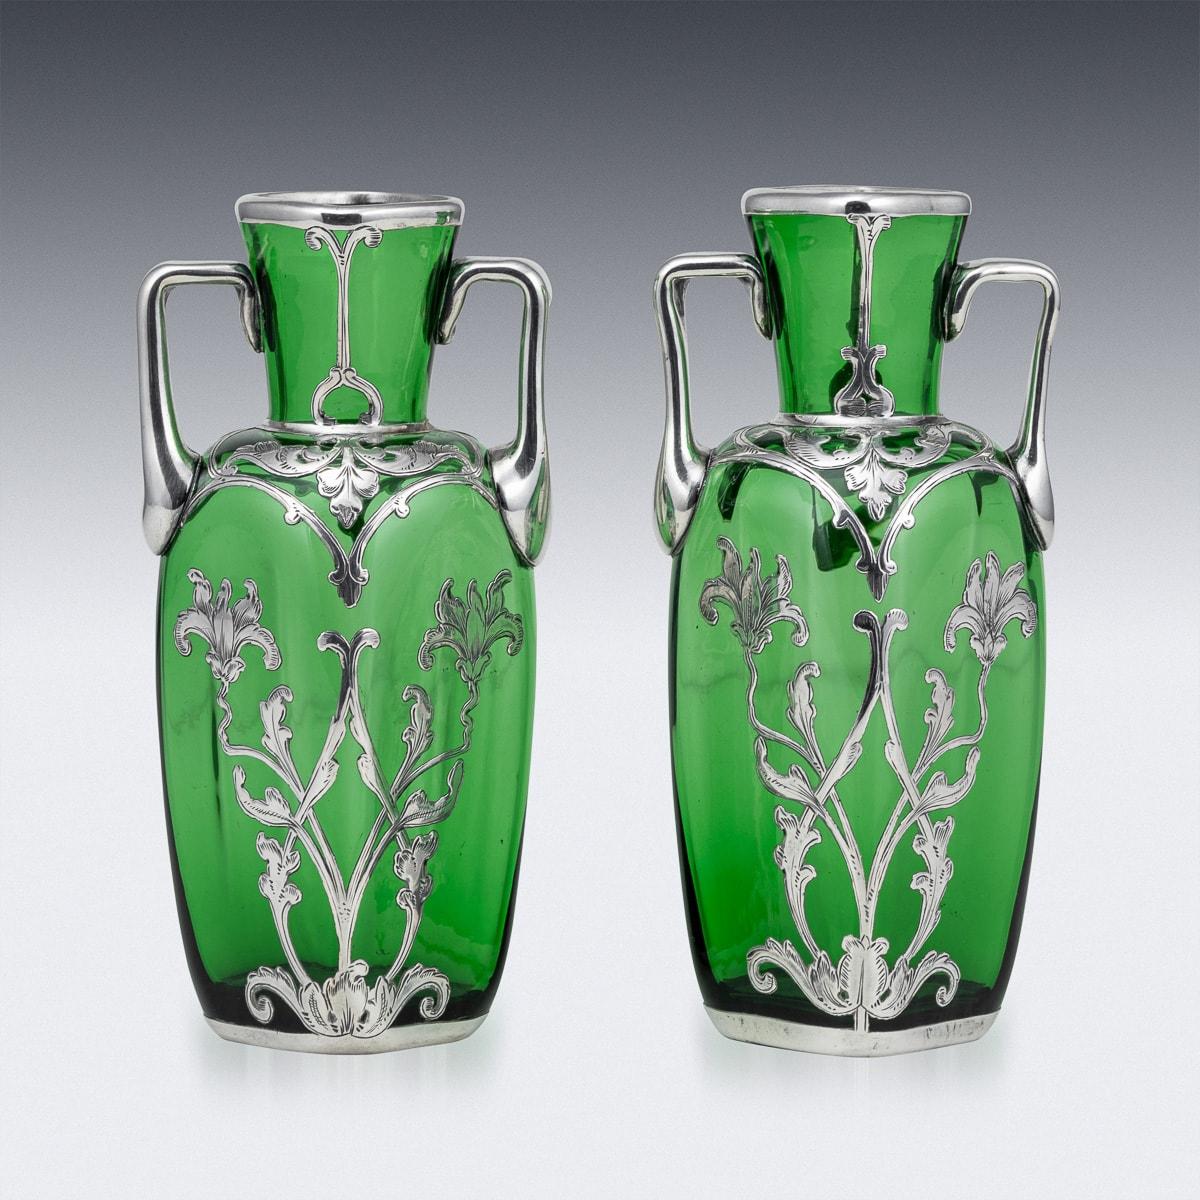 Antique 20th Century Art Nouveau green glass vases, crafted in a typical Alvin style. Adorned with delicate silver flowers and handles, these American urns add a touch of elegance to any space. A charming decorative piece suitable for any home